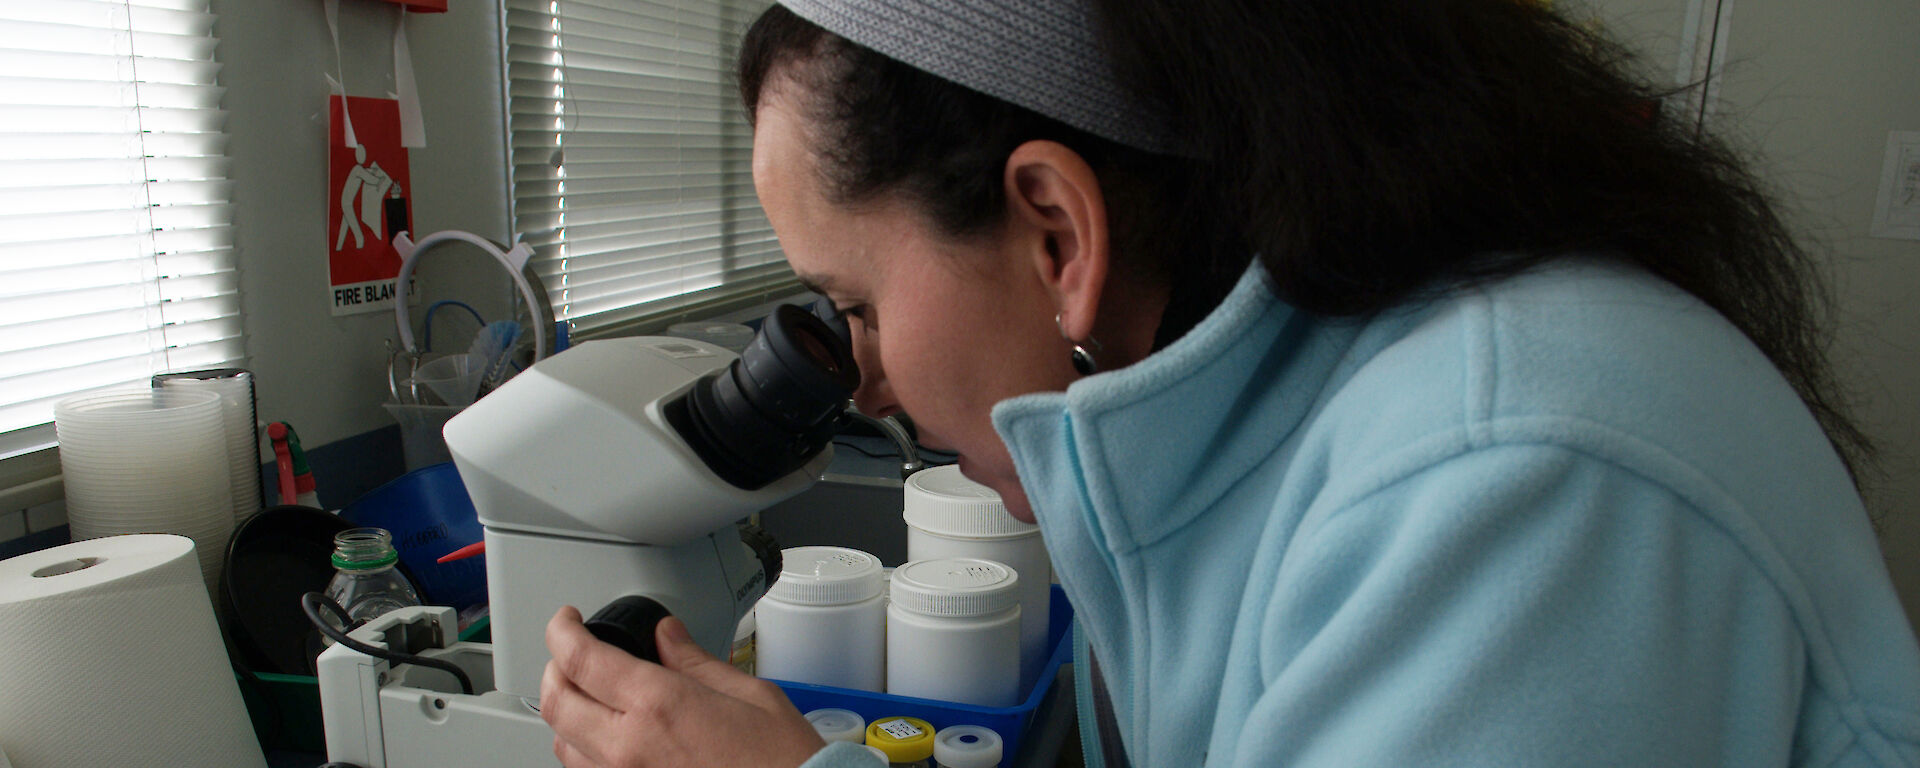 Dr Claudia Arango identifying a collection of small sea spiders under the microscope.